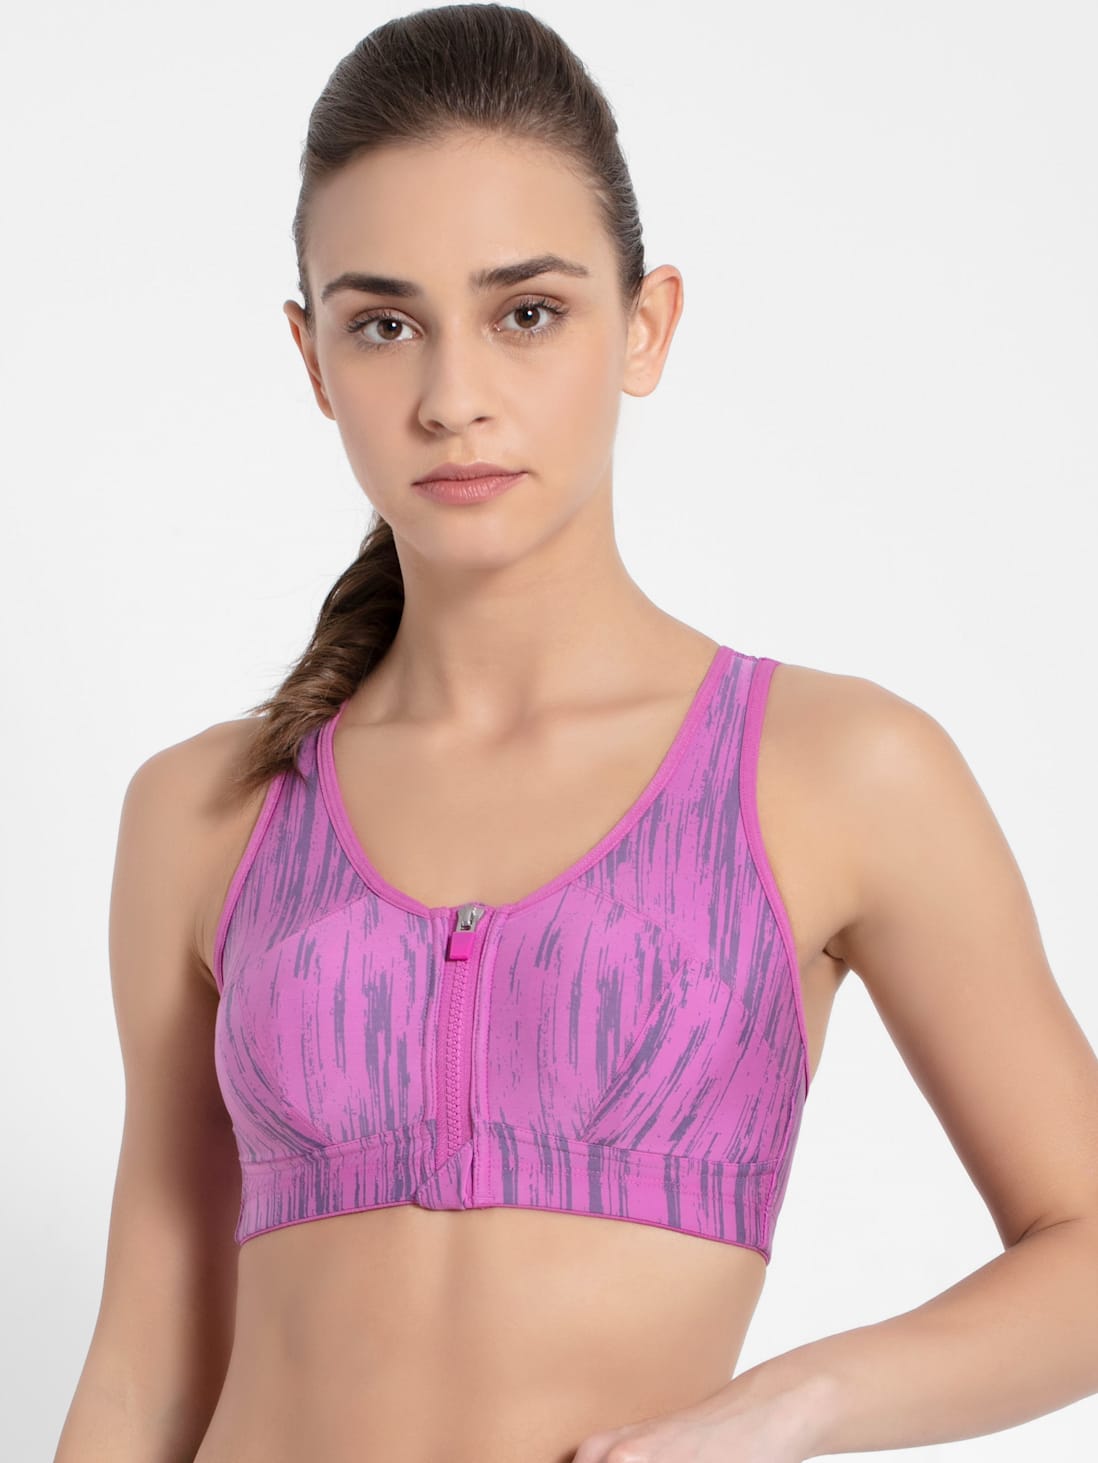 LEADING LADY Women's Wirefree Sports Nursing Bra with Padded Comfort Straps